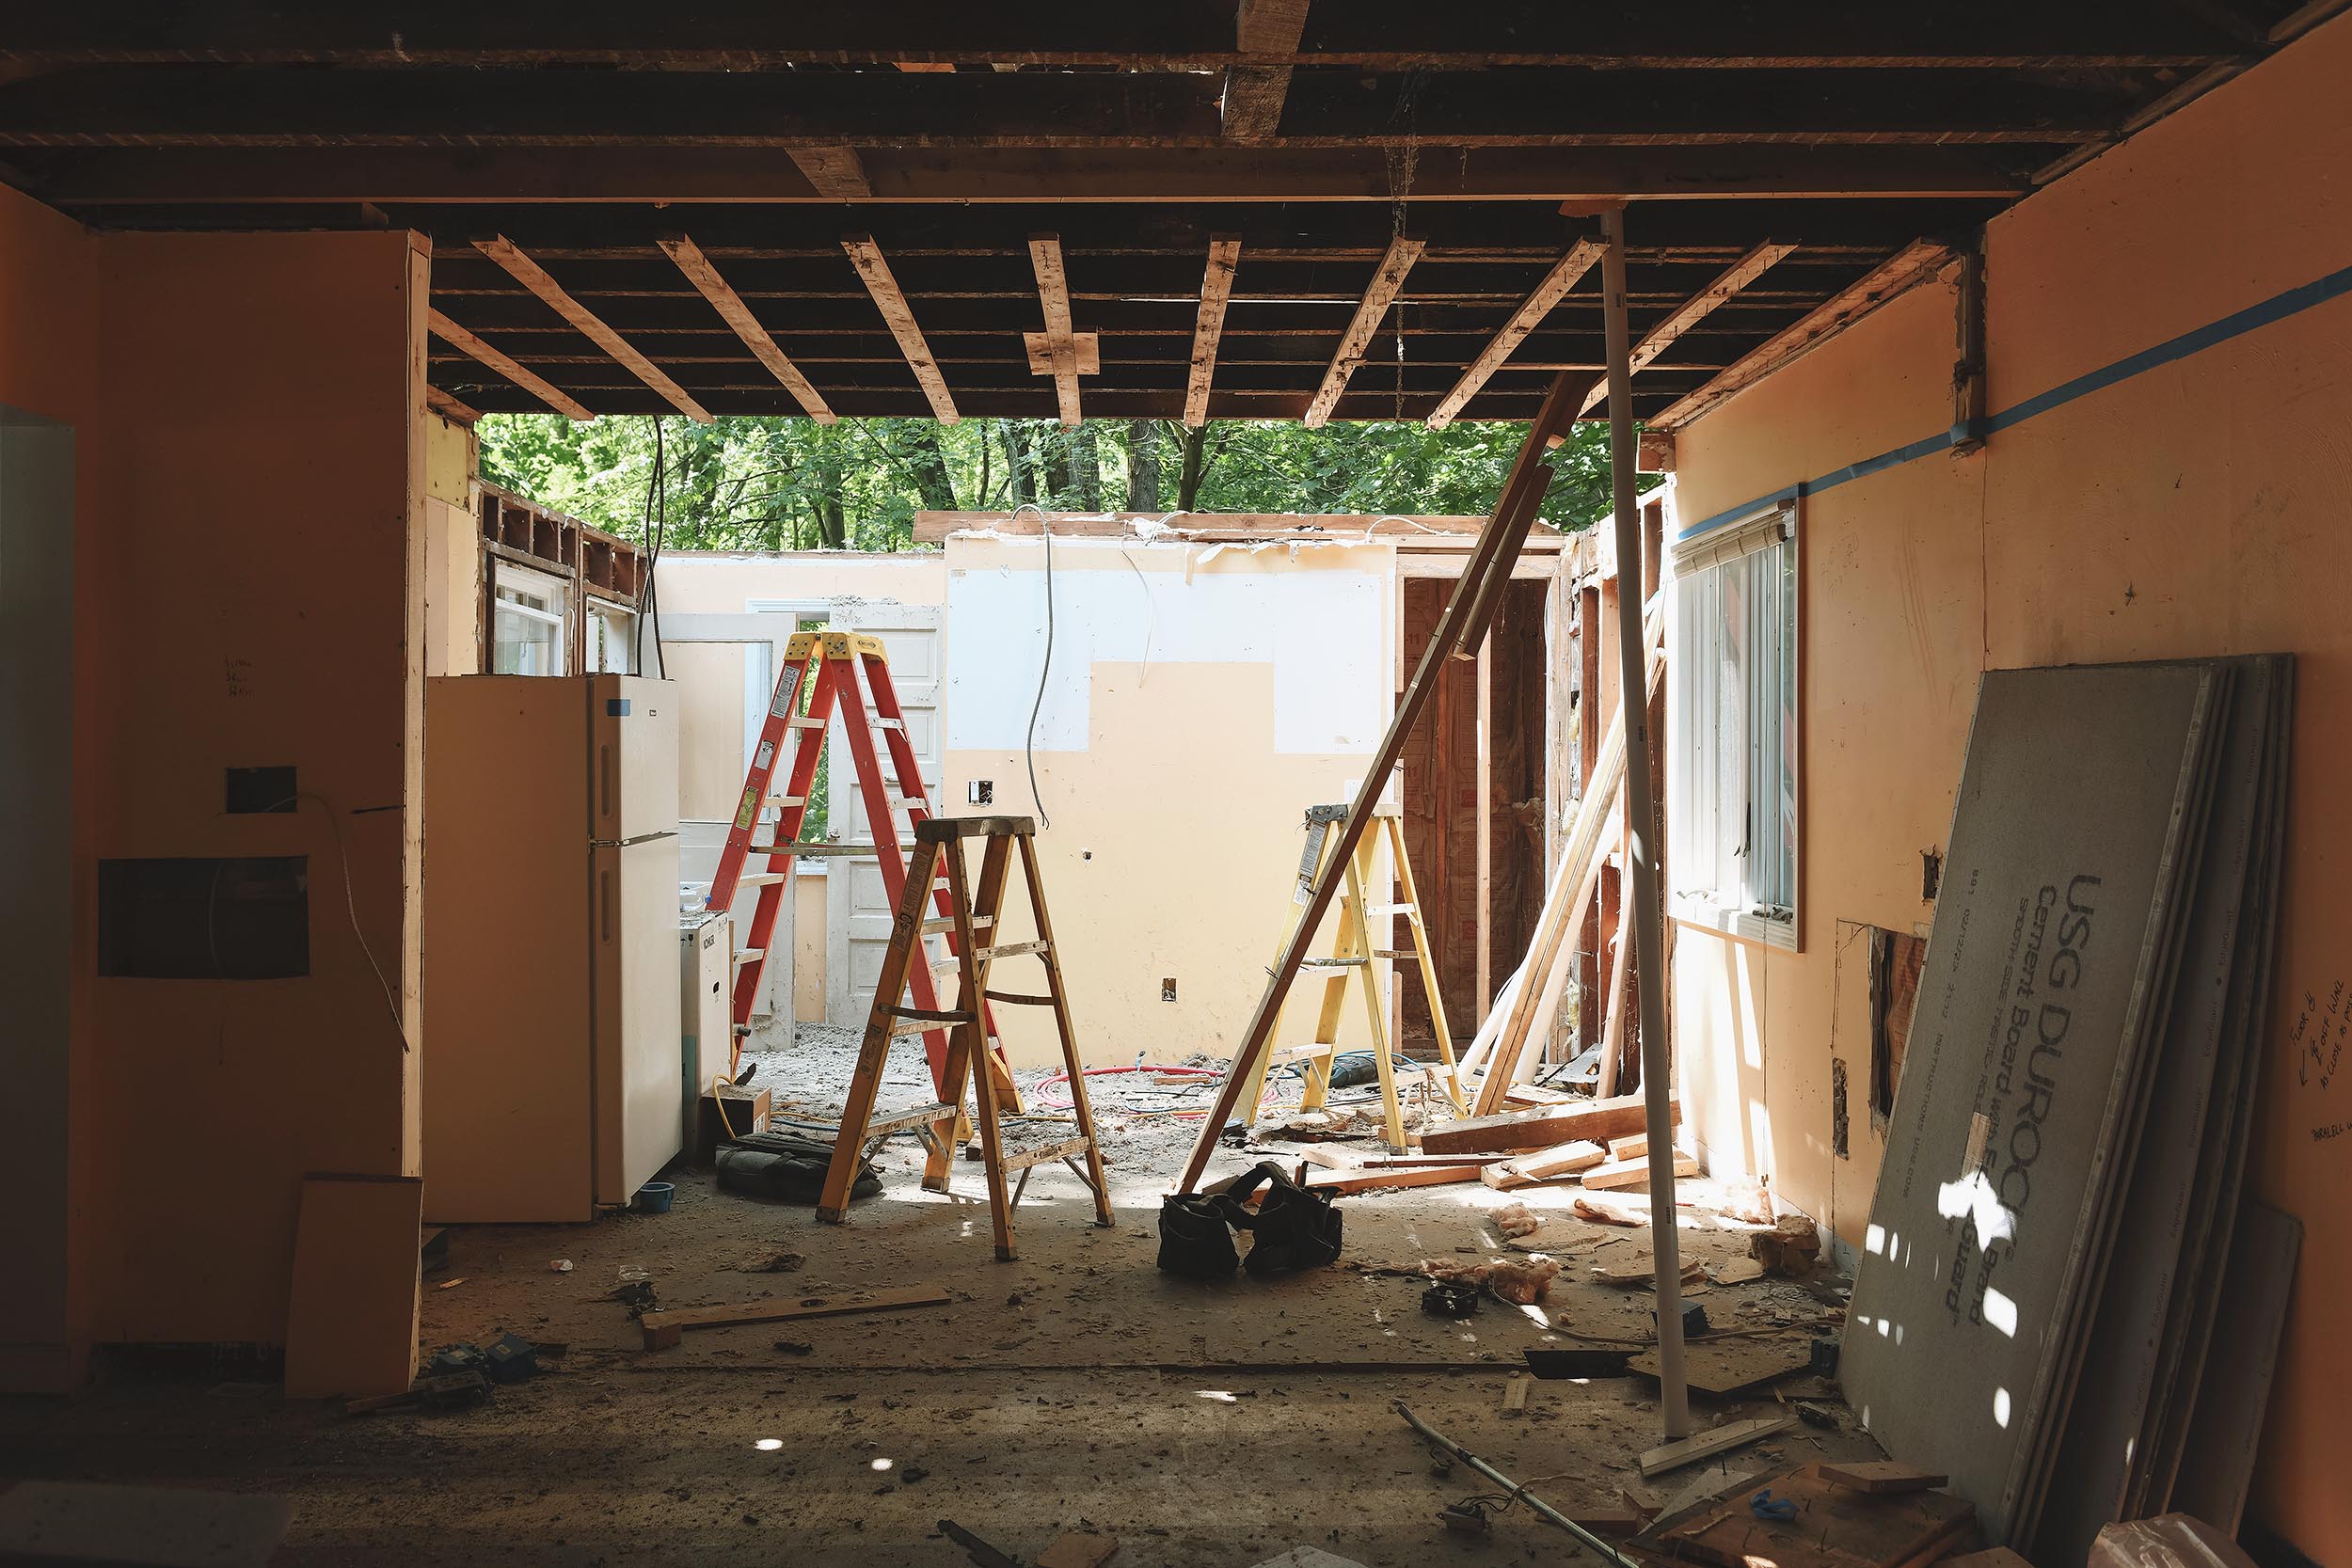 Dining room and kitchen during demolition // via Yellow Brick Home